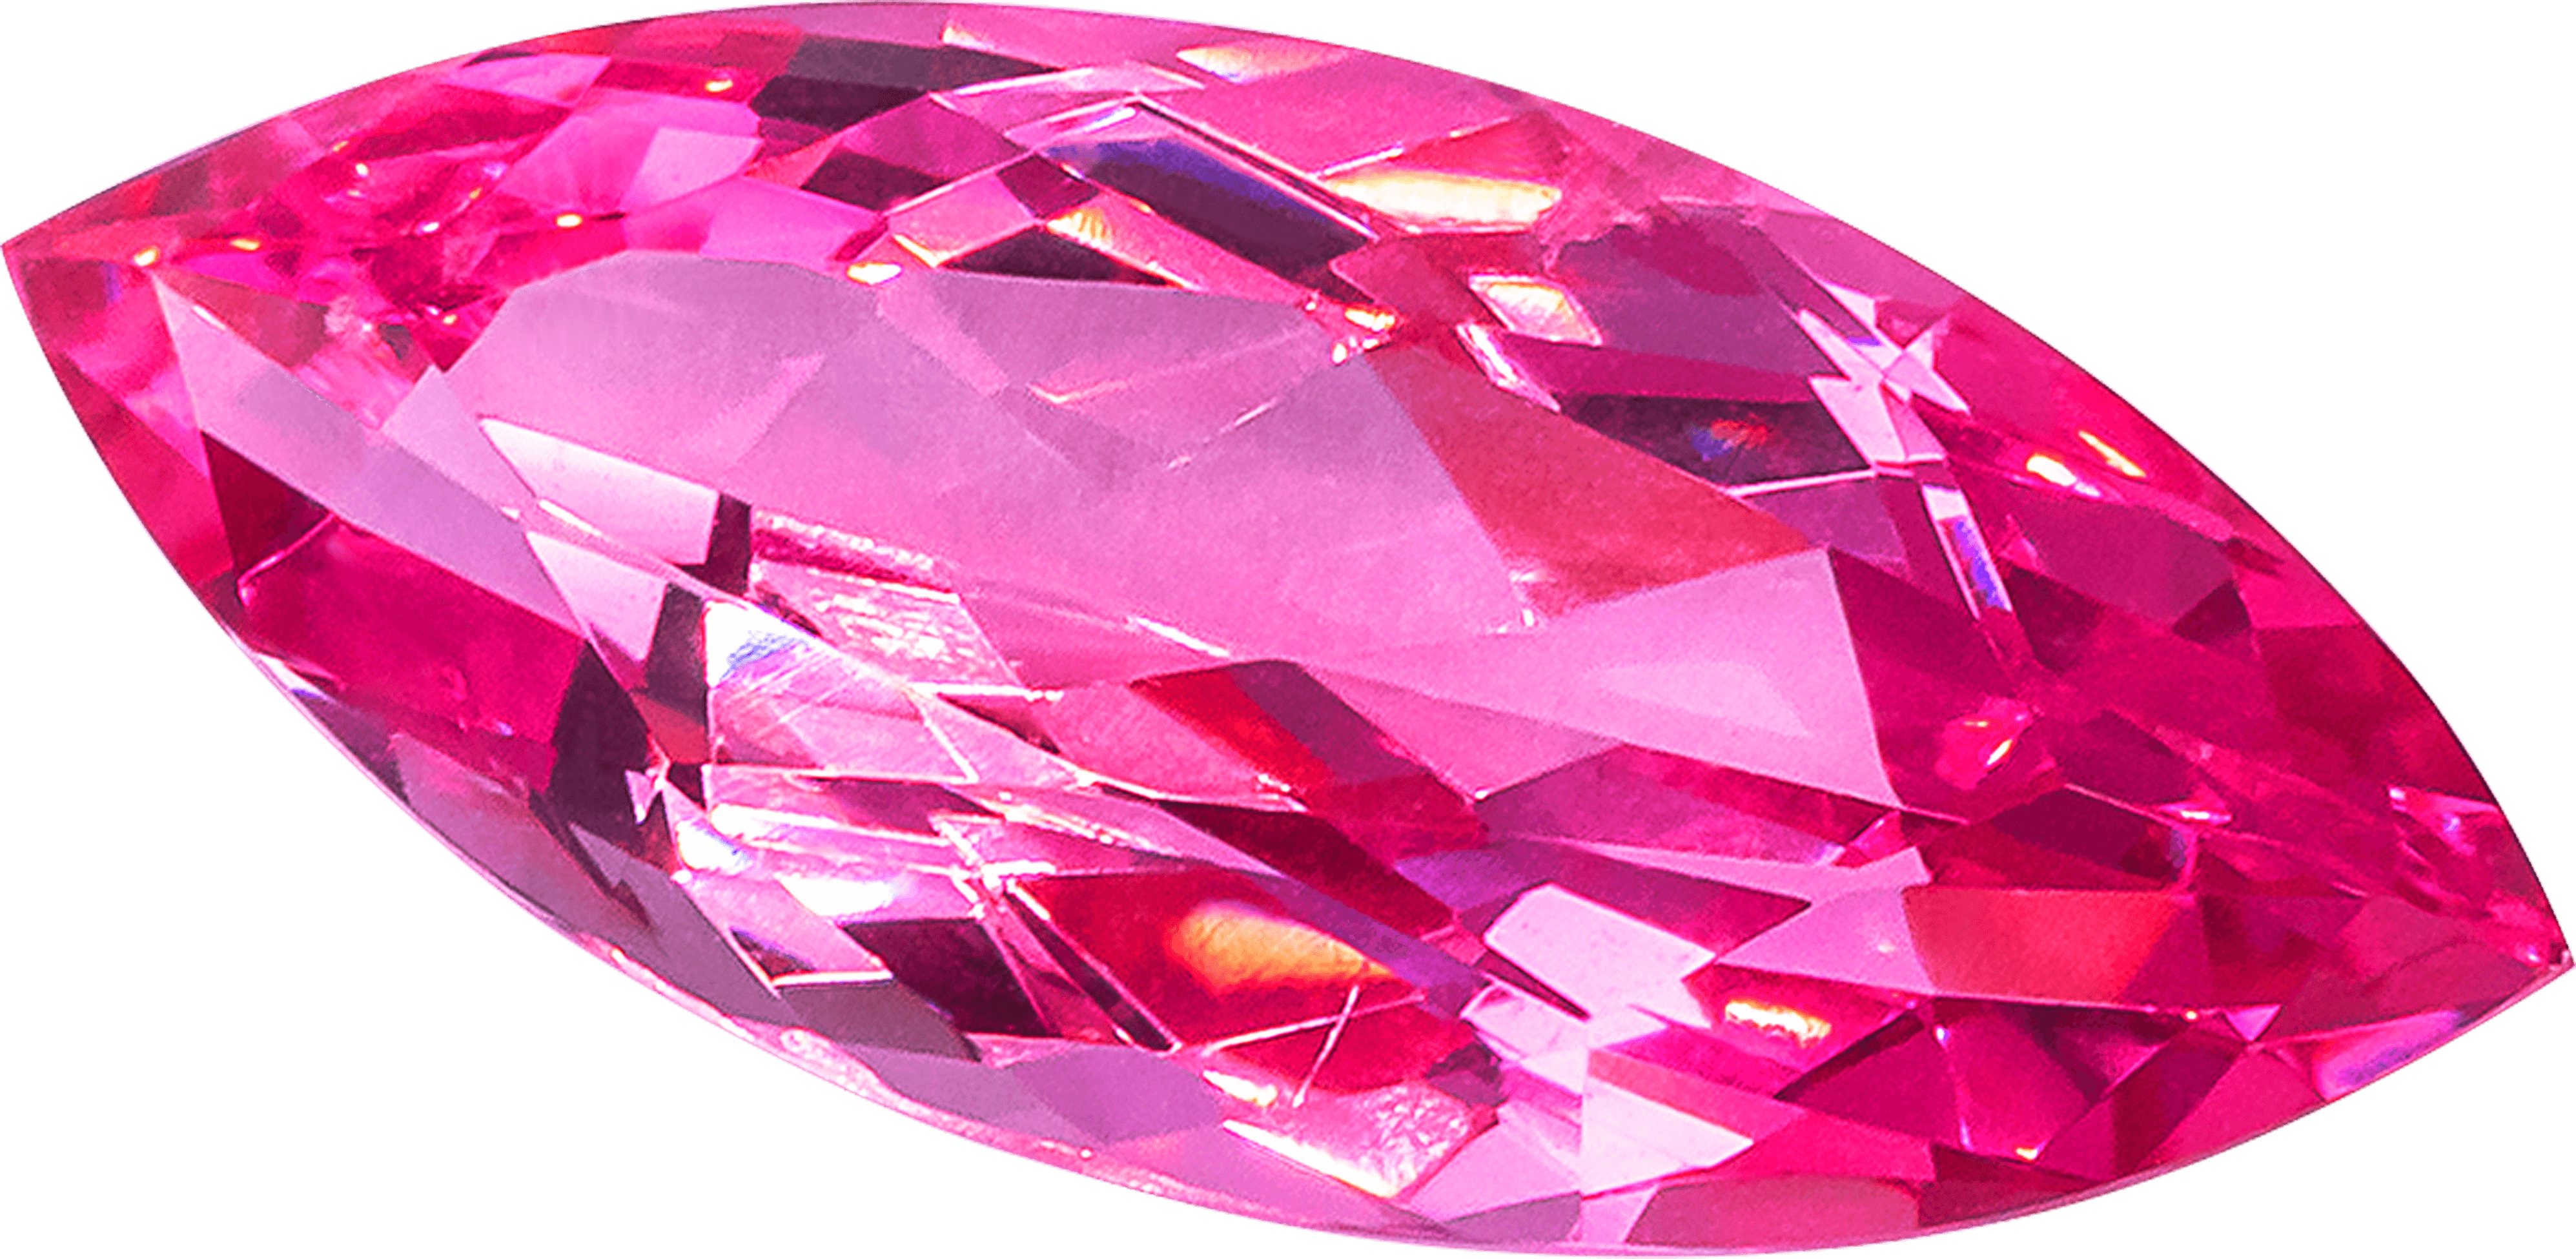 Stone Spinel Download HQ PNG Image